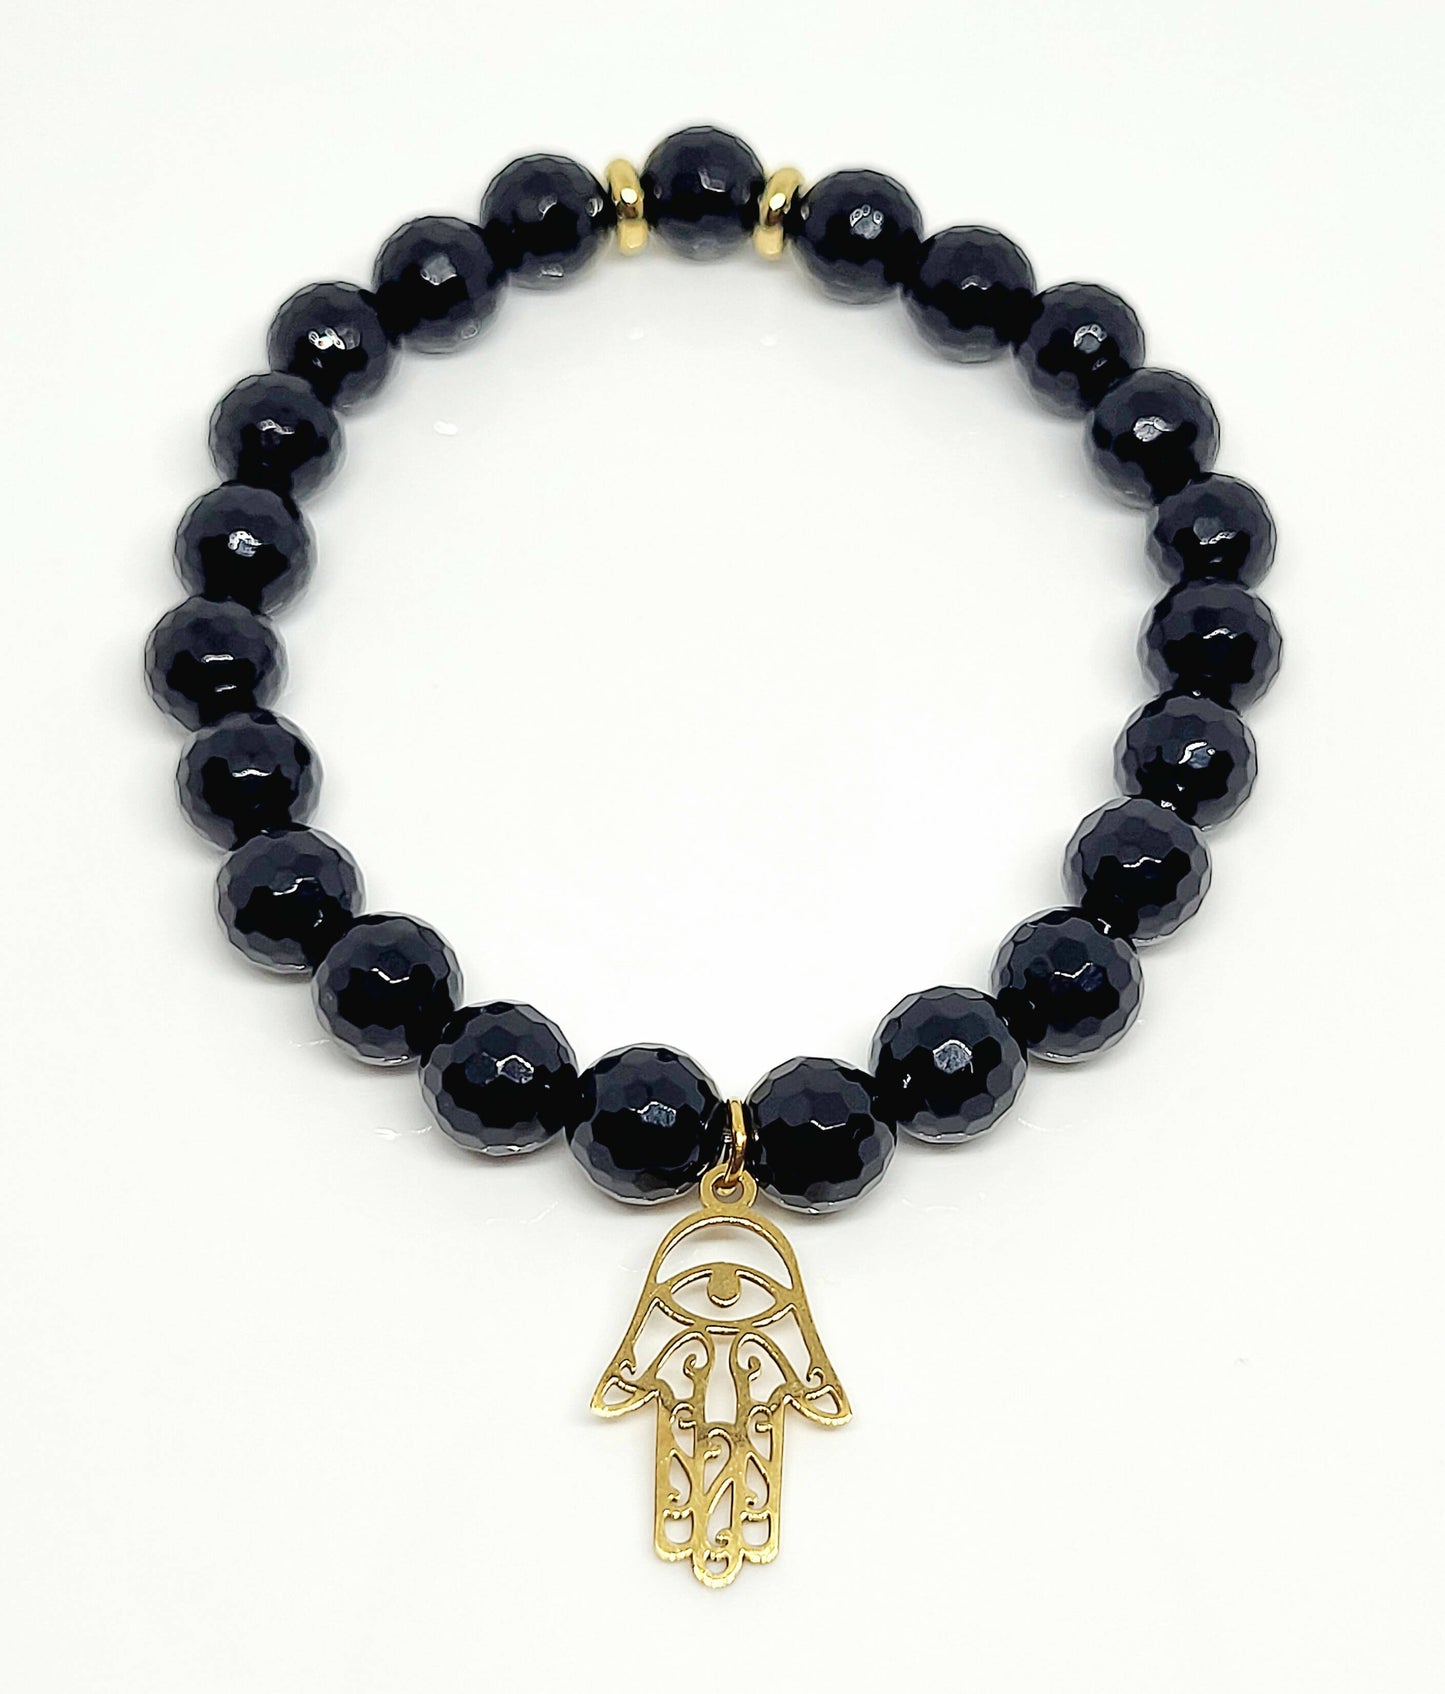 Faceted Onyx, Golden Stainless Steel, Hamsa Charm Stretch Bracelet